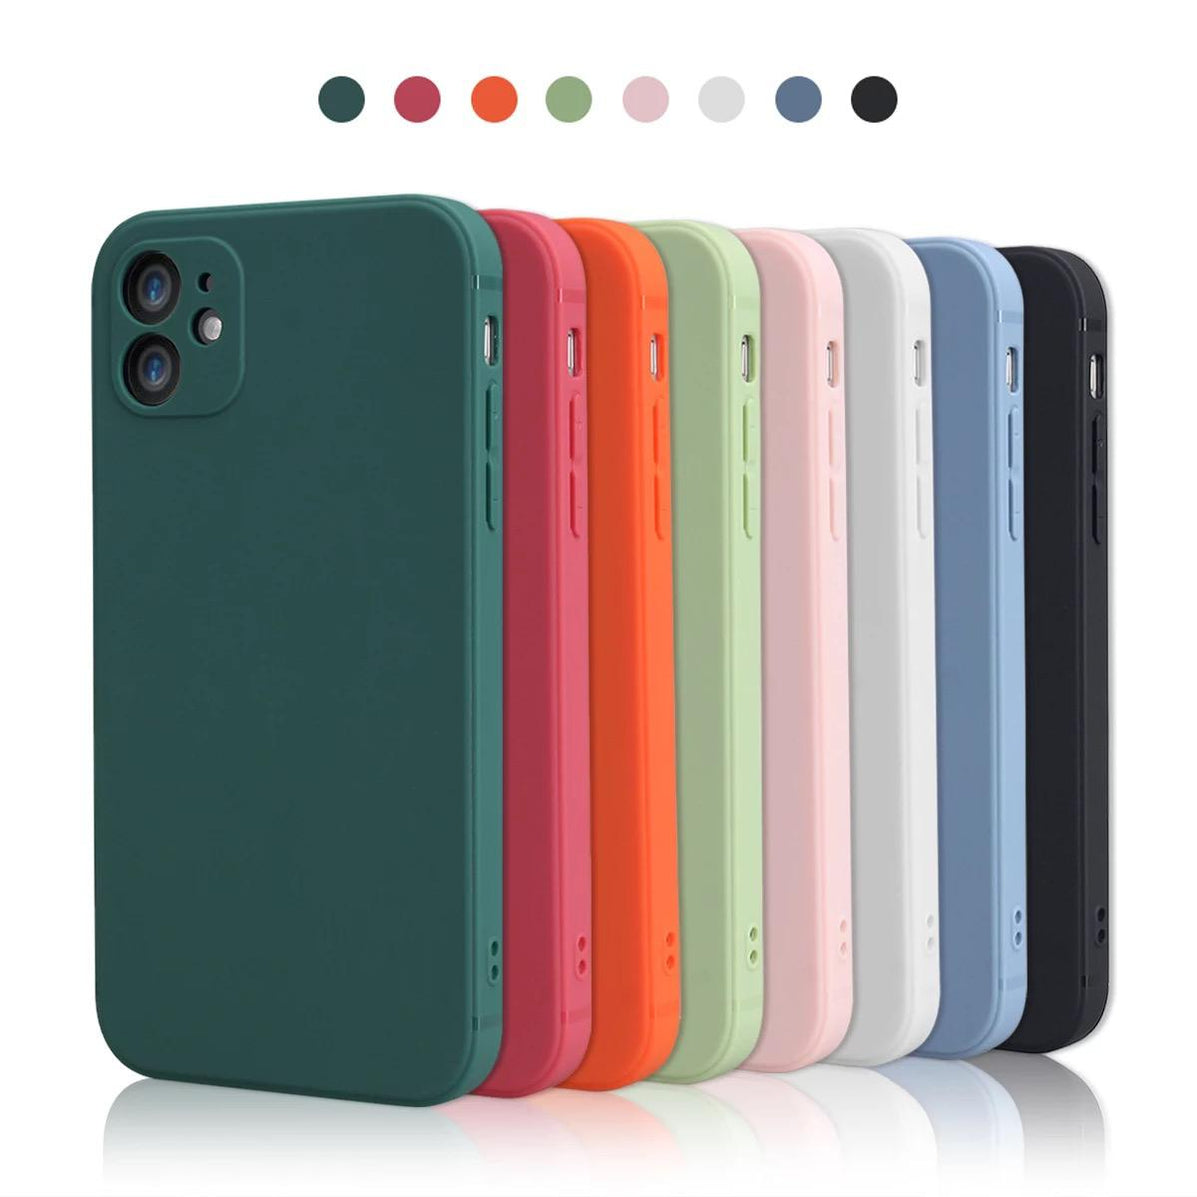 iPhone 12 Mini Soft Silicone Case Cover (Assorted Color ...